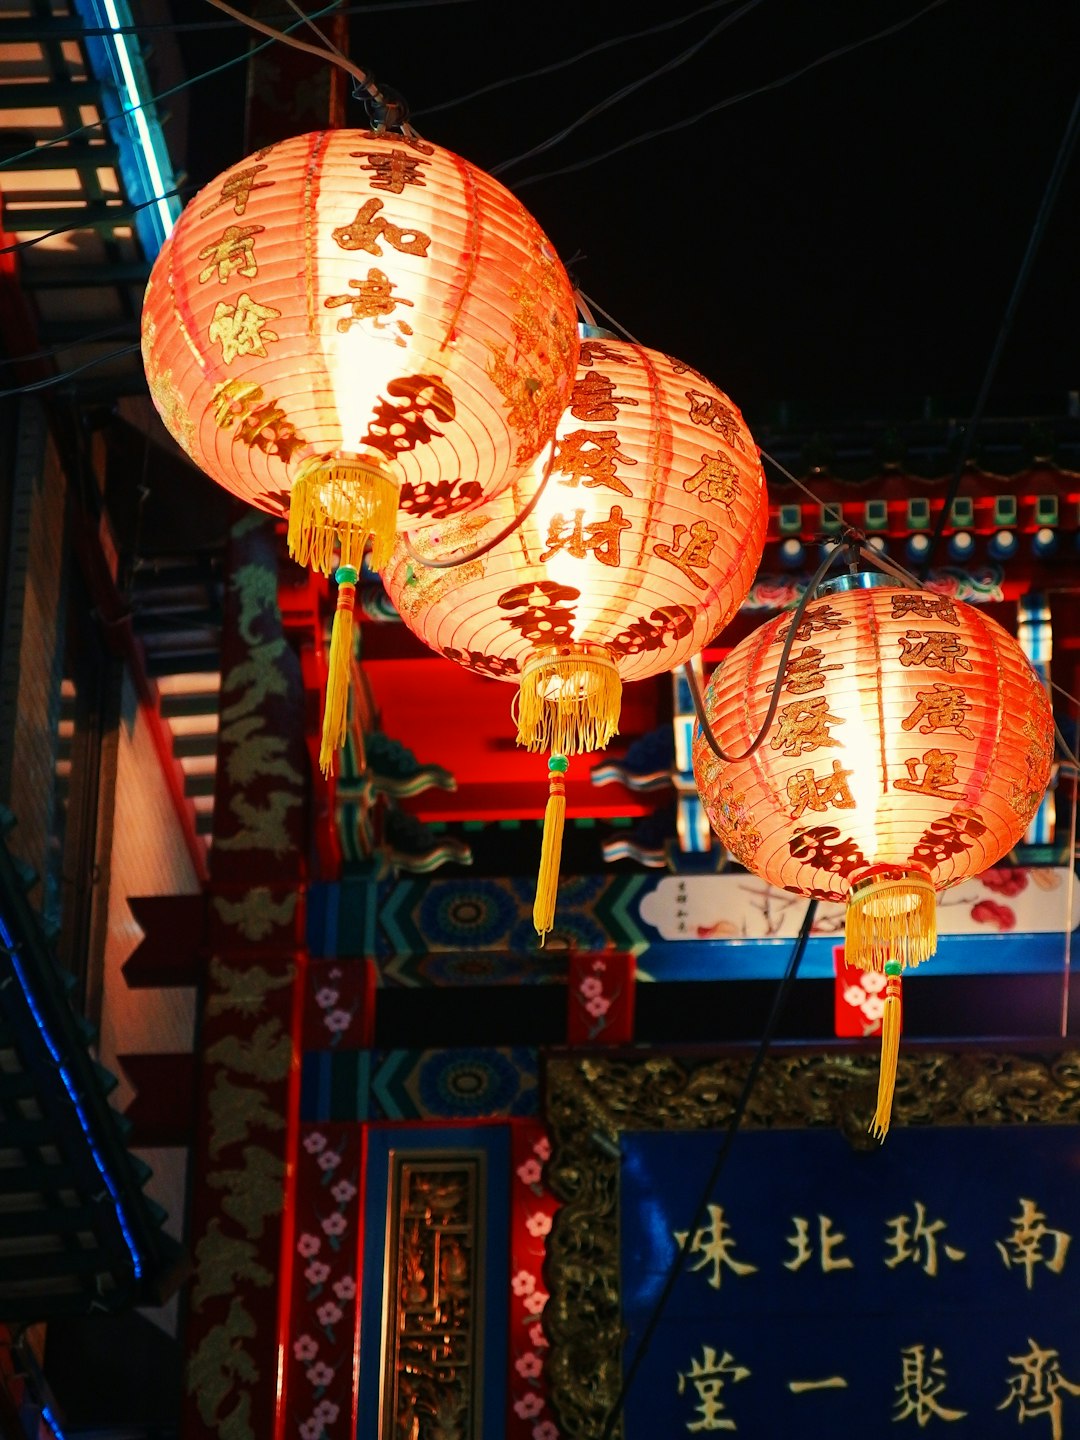 Travel Tips and Stories of Chinatown in Japan